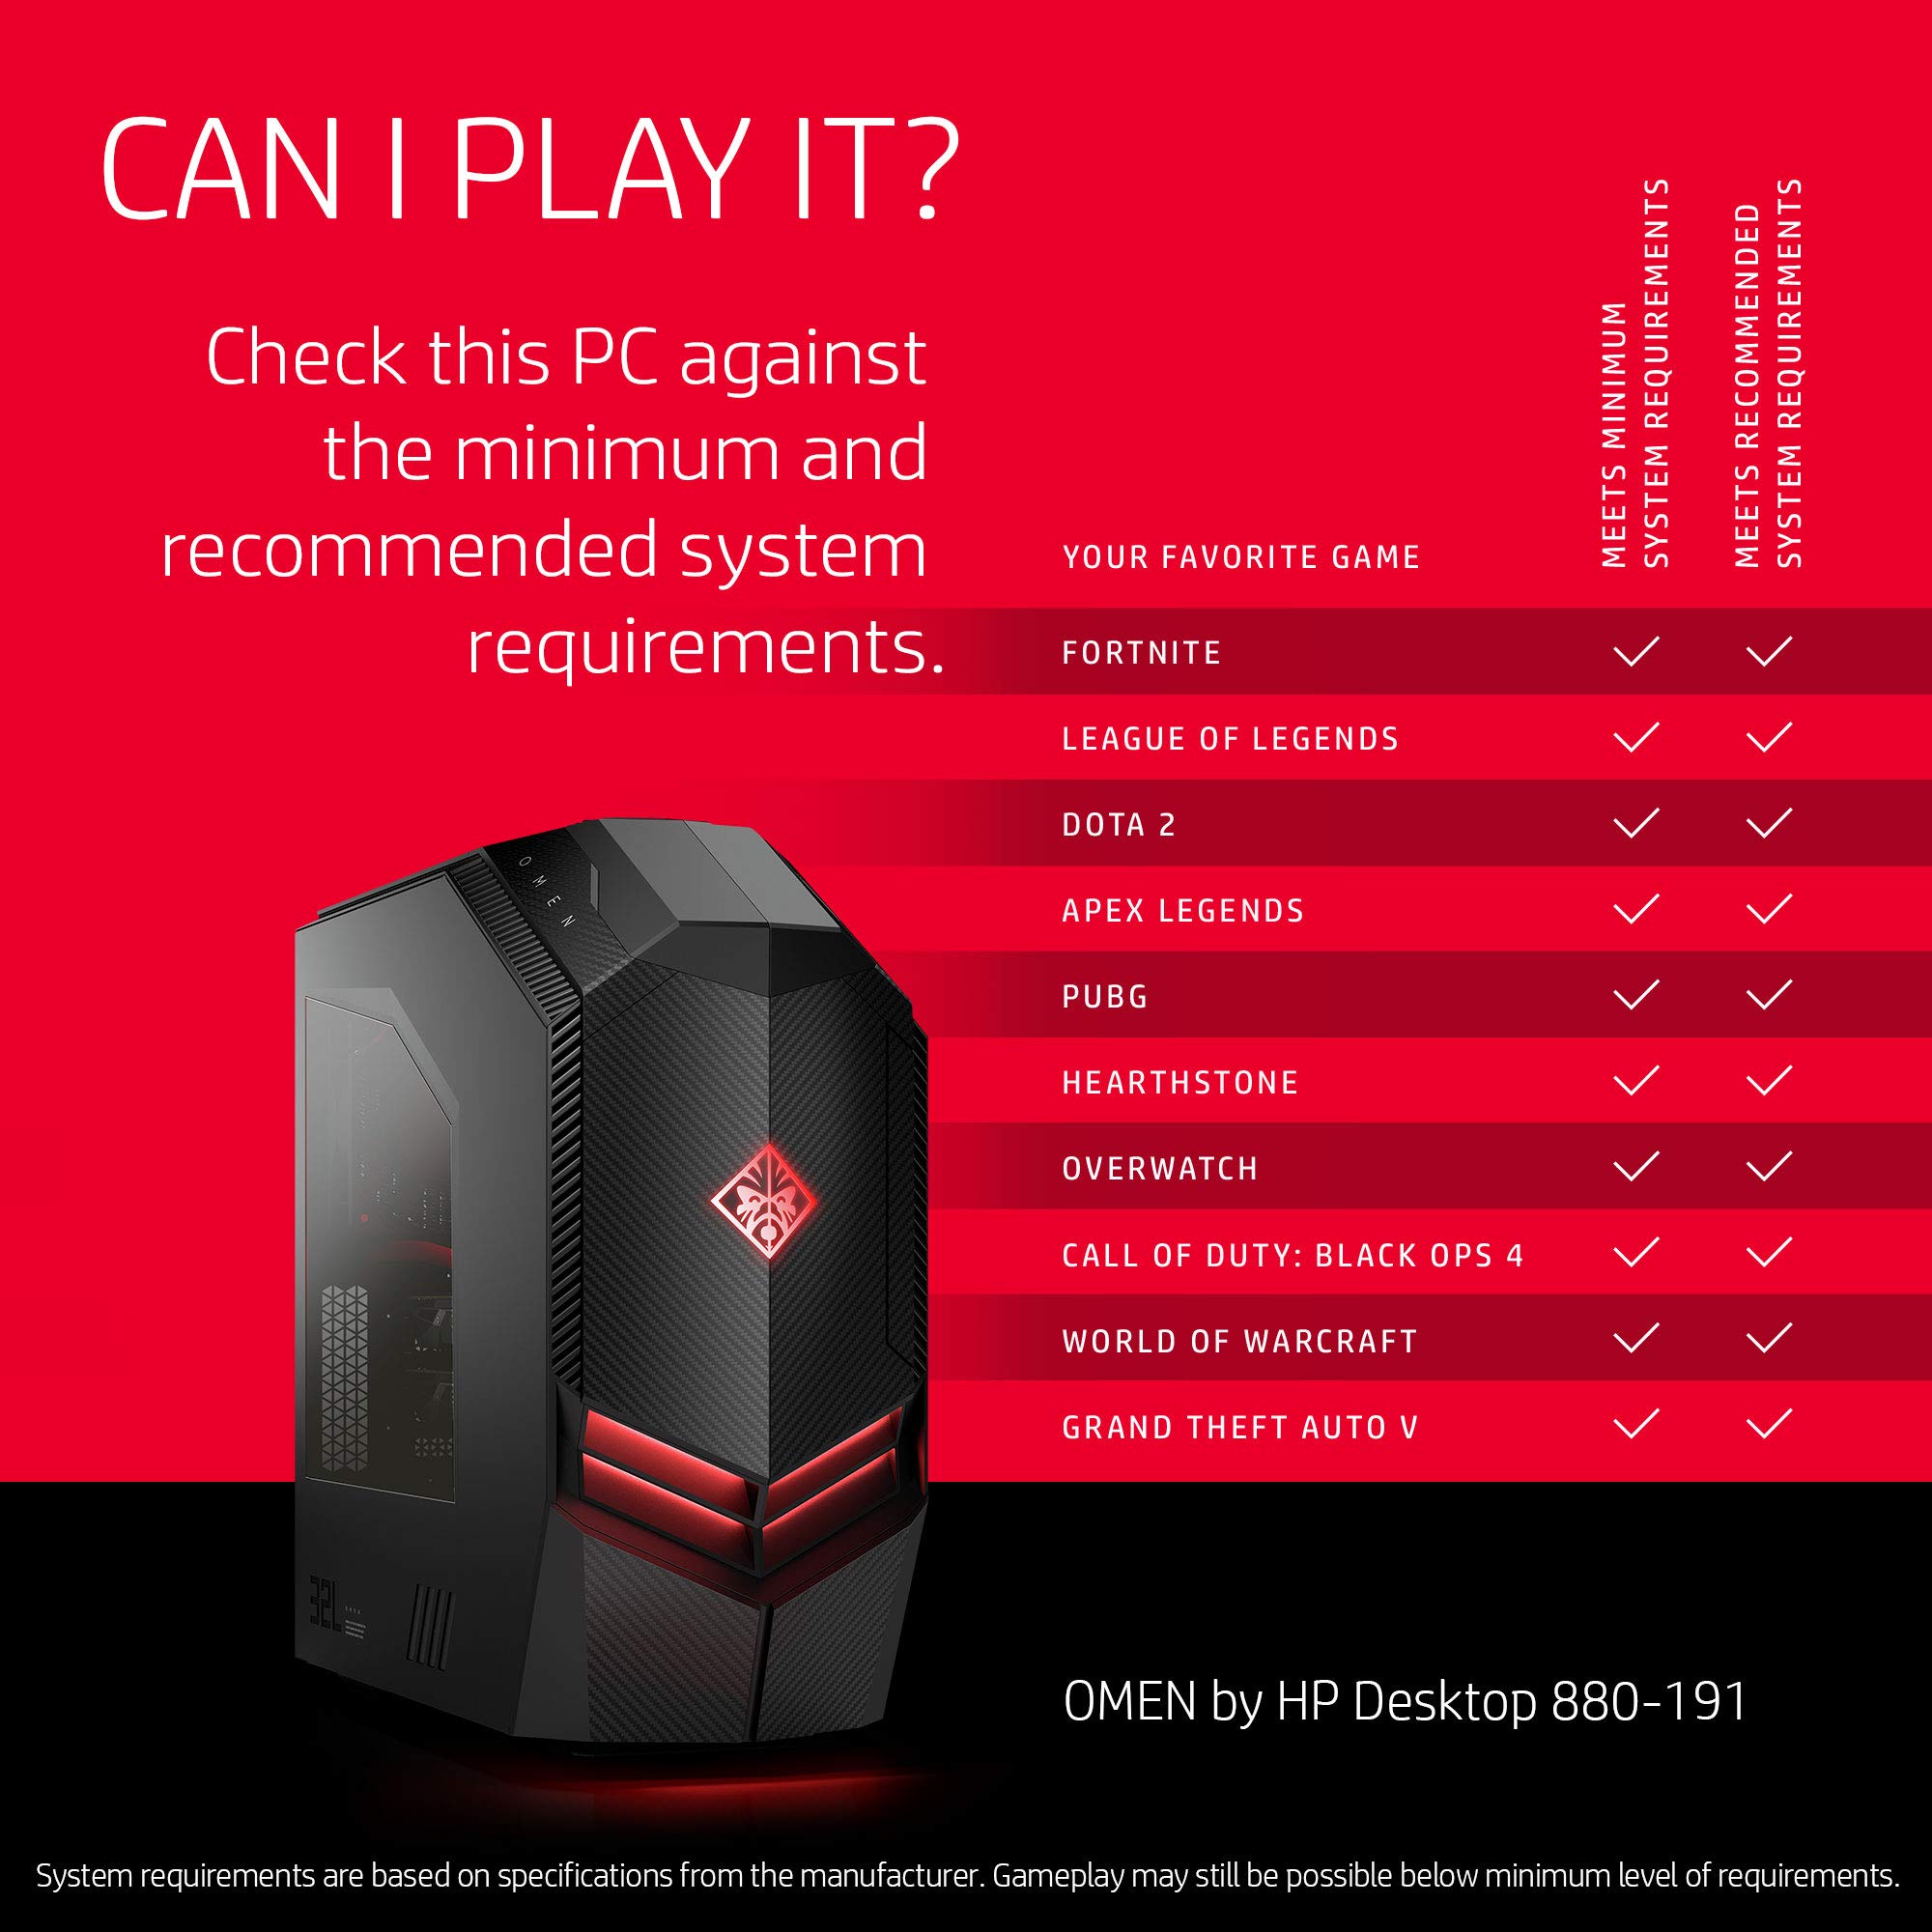 Locate the HP Omen Command Center in the list of installed programs.
Right-click on it and select "Uninstall."